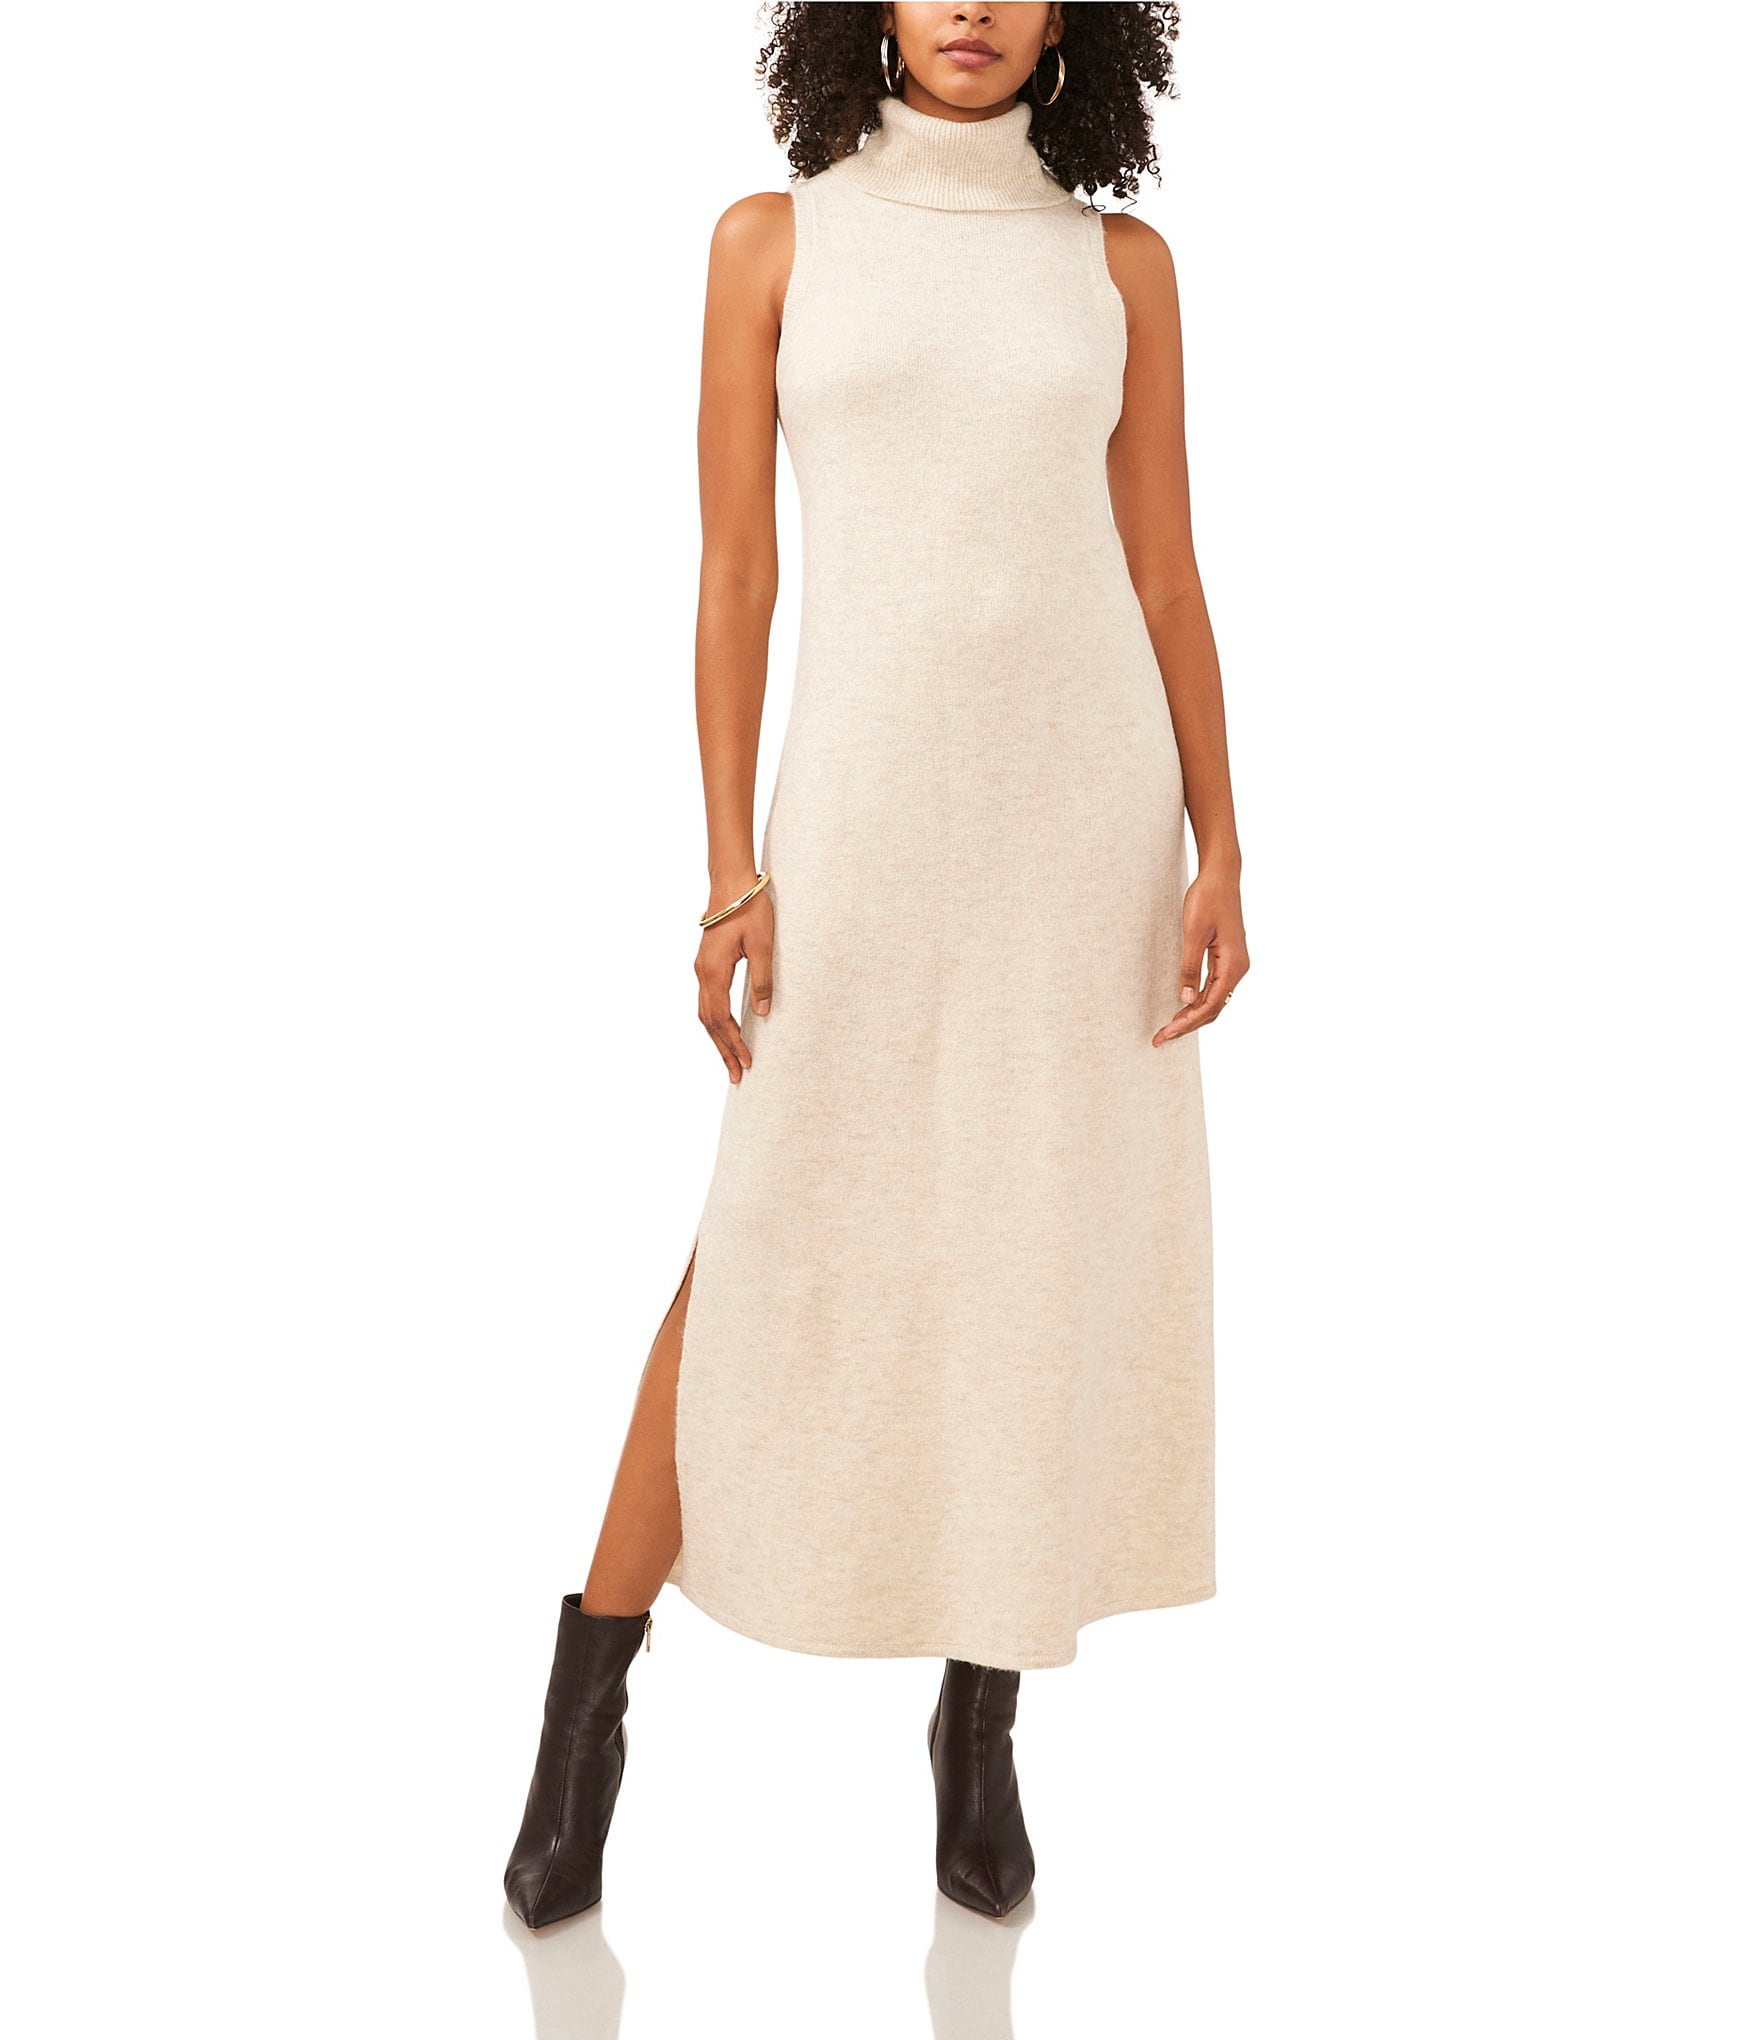 vince camuto womens dresses: Women's Workwear, Suits & Office